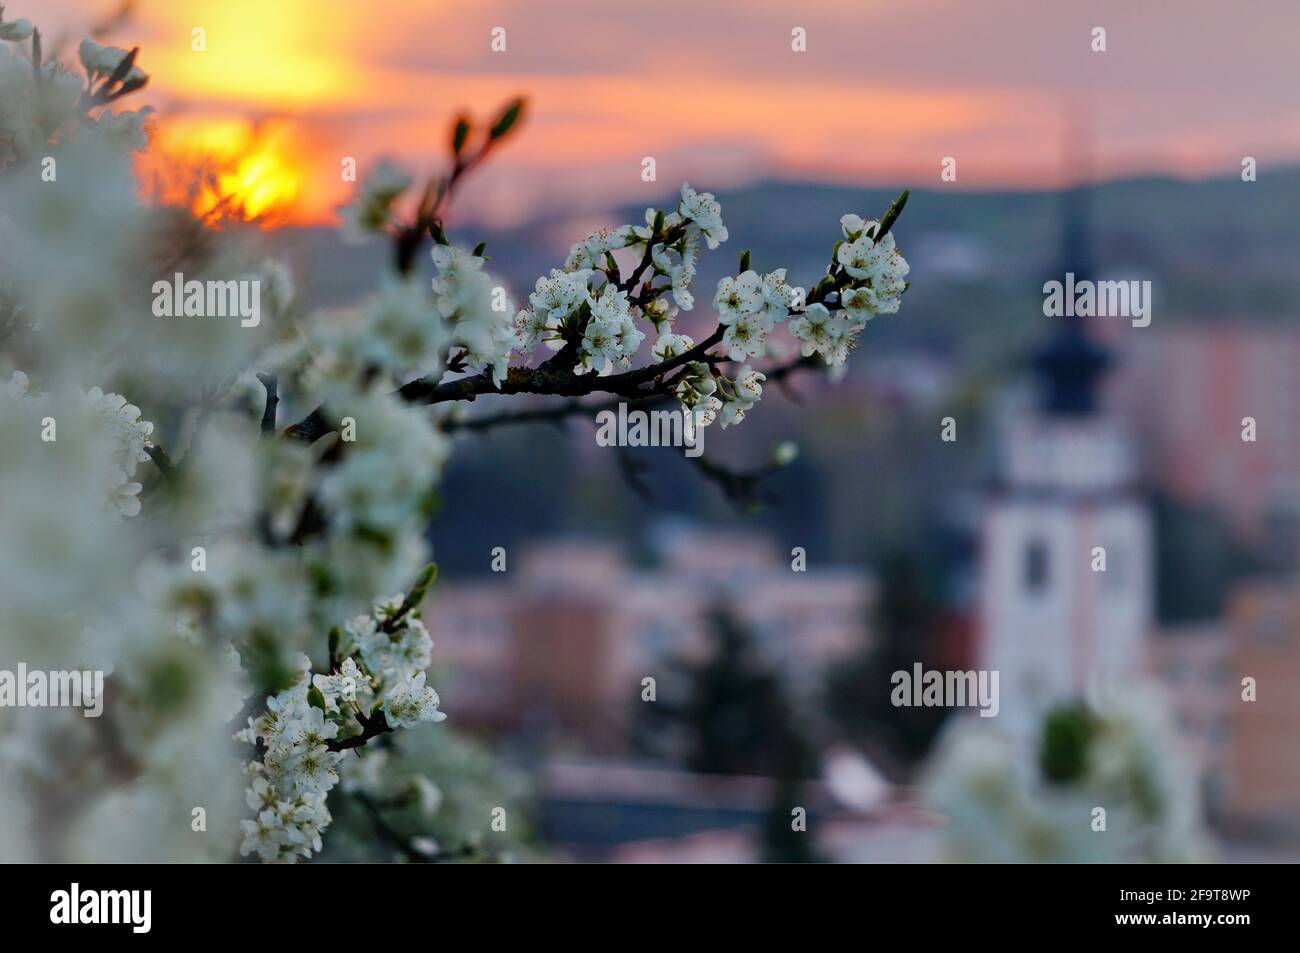 White tree blossoms during spring season at sunrise, with blurred tower of an Evangelical church in Slovak town of Myjava in the background Stock Photo